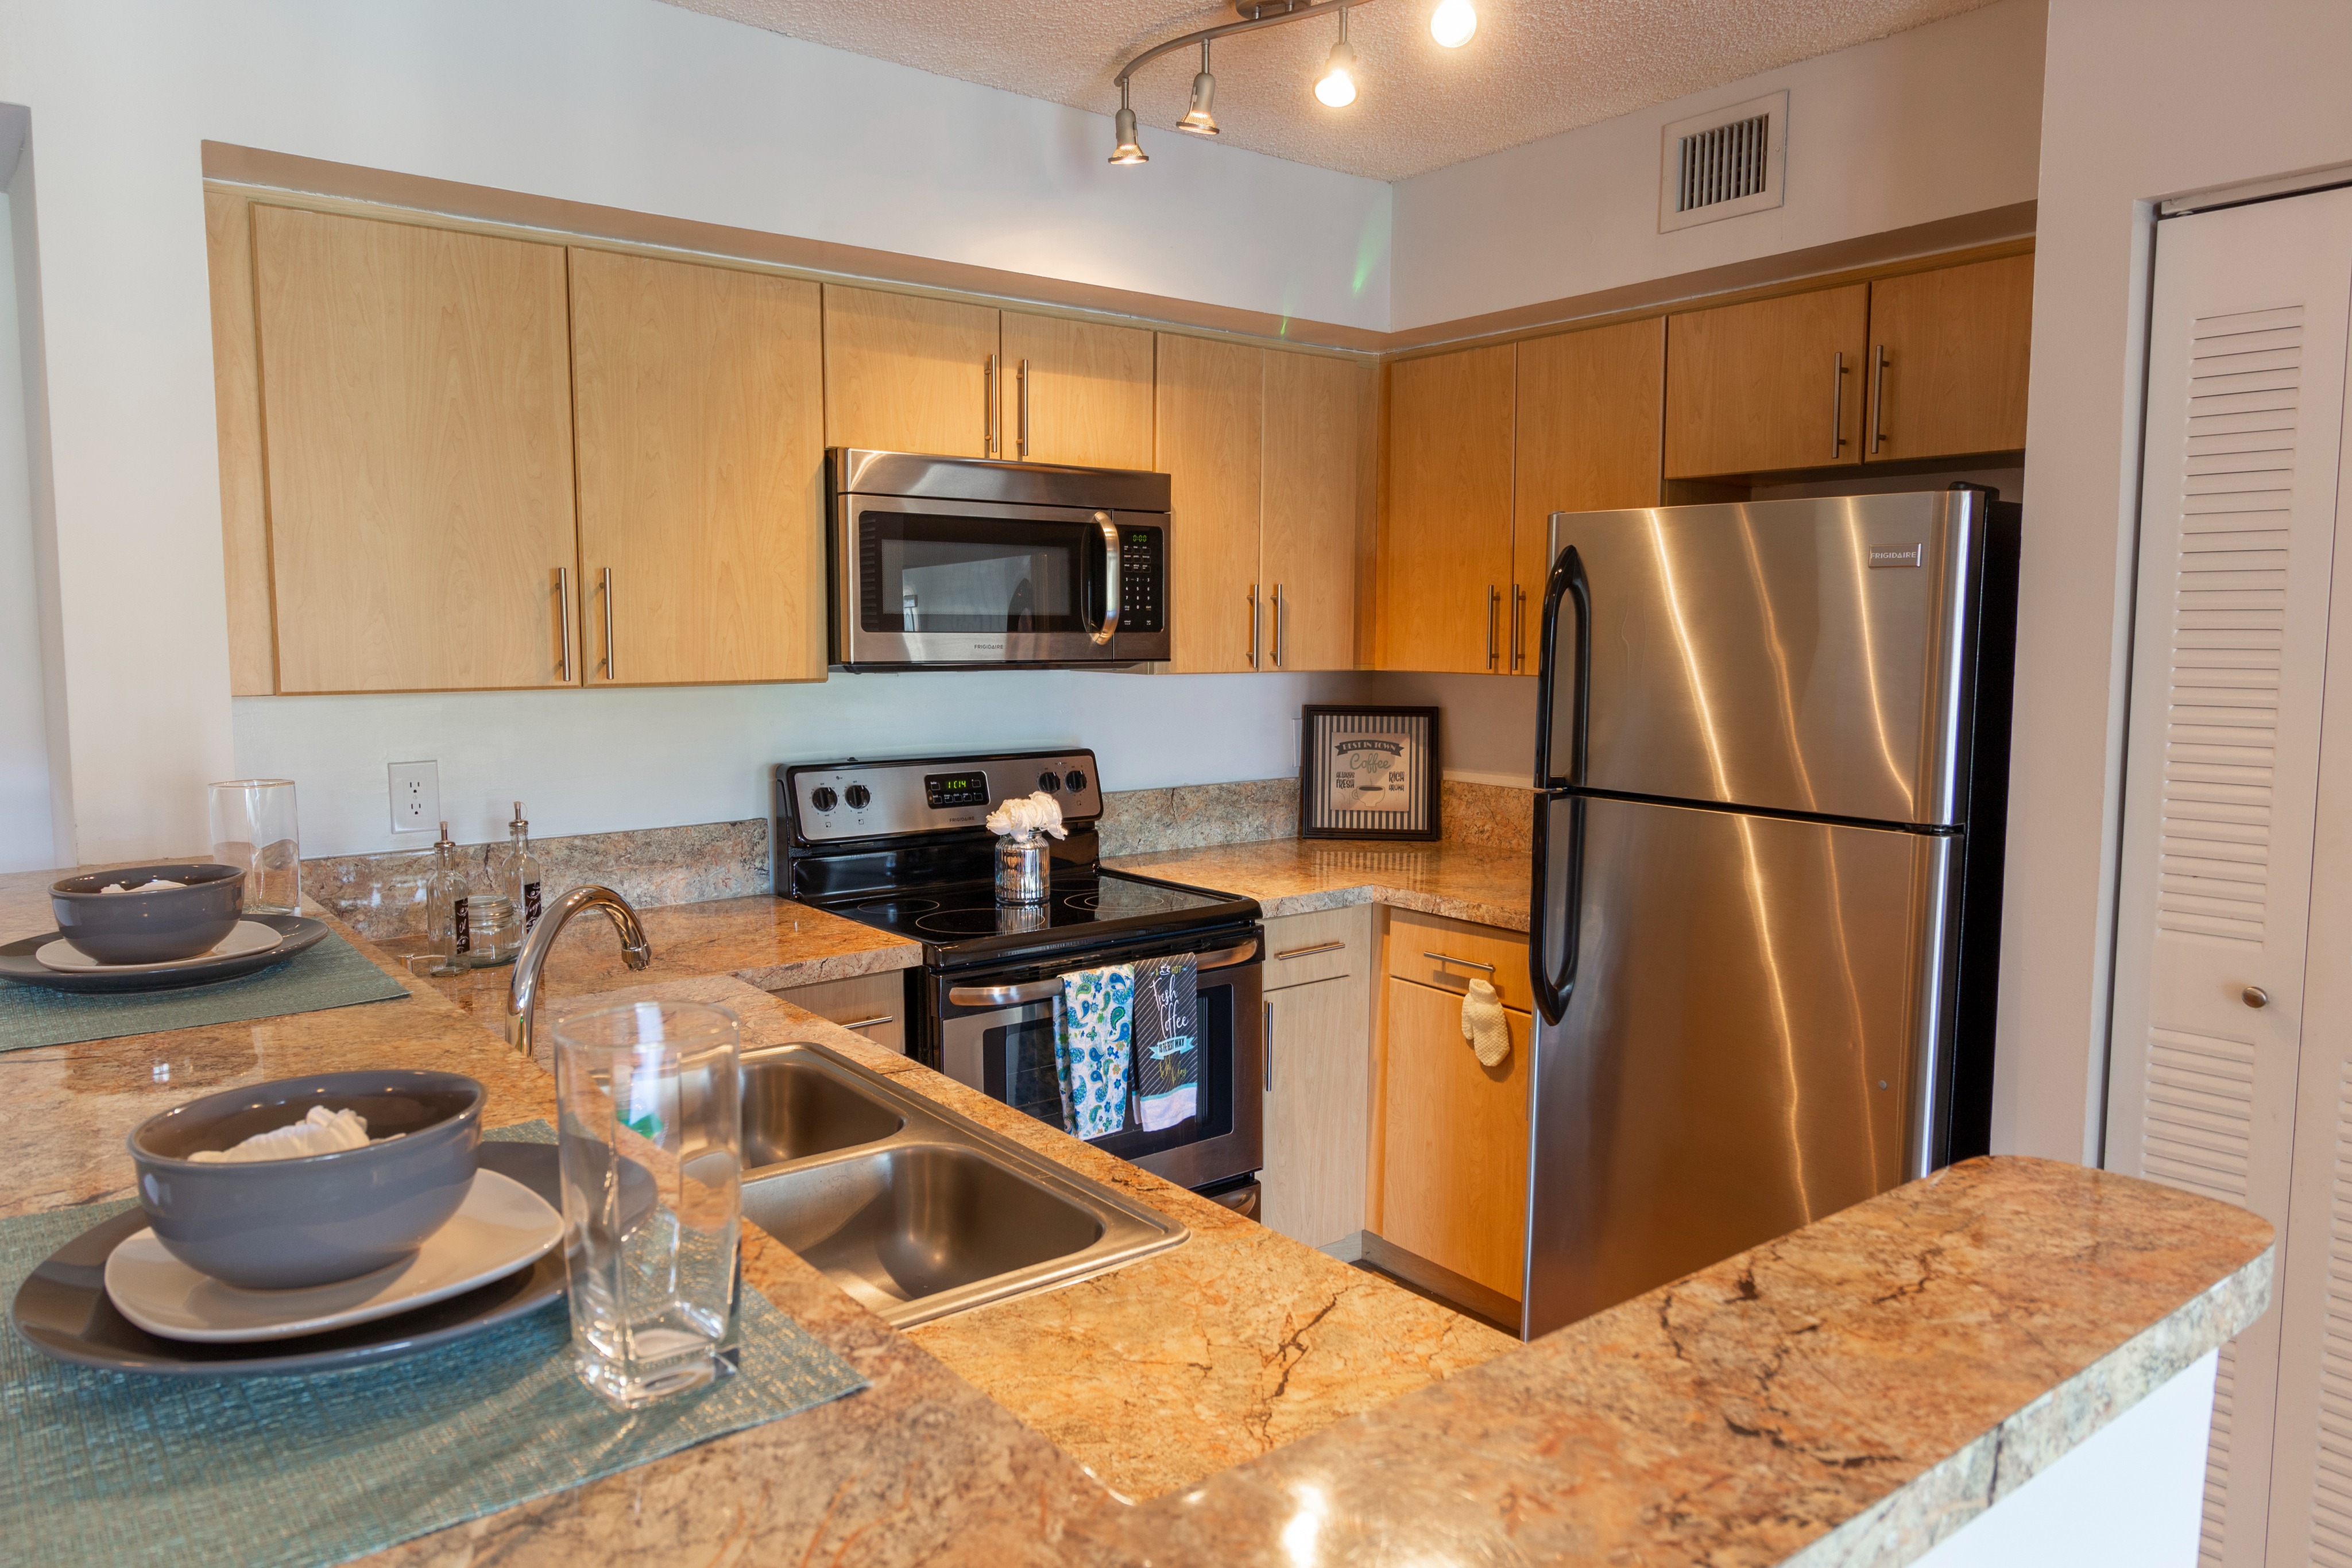 Compact kitchen counter with large stainless steel sink, overhead cabinets, and dishwasher next to double-door pantry